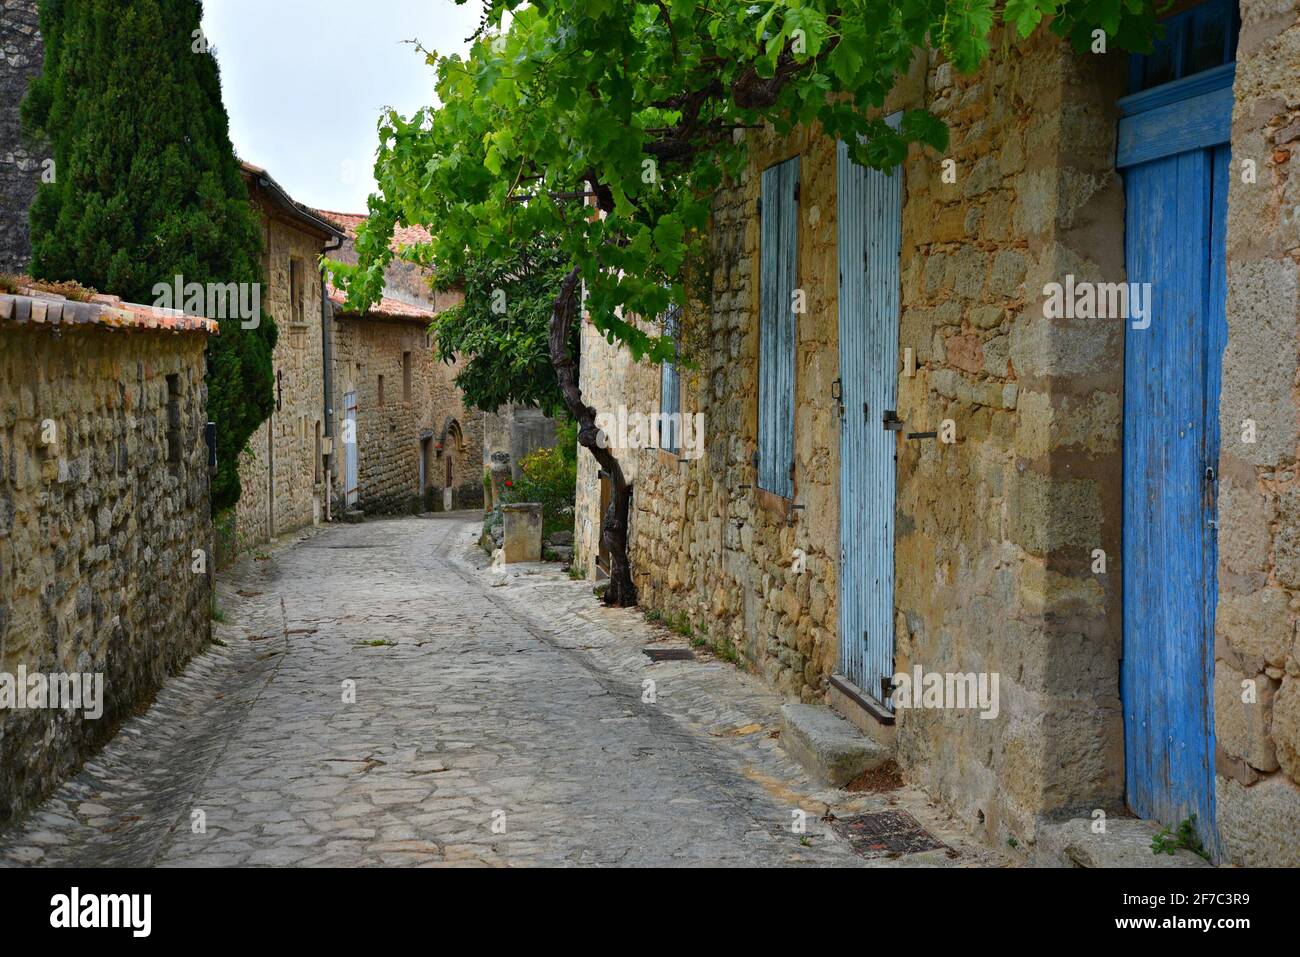 Rural Provençal style houses along a calade alley in the picturesque village of Grambois, Provence-Alpes-Côte d'Azur, Vaucluse, France. Stock Photo